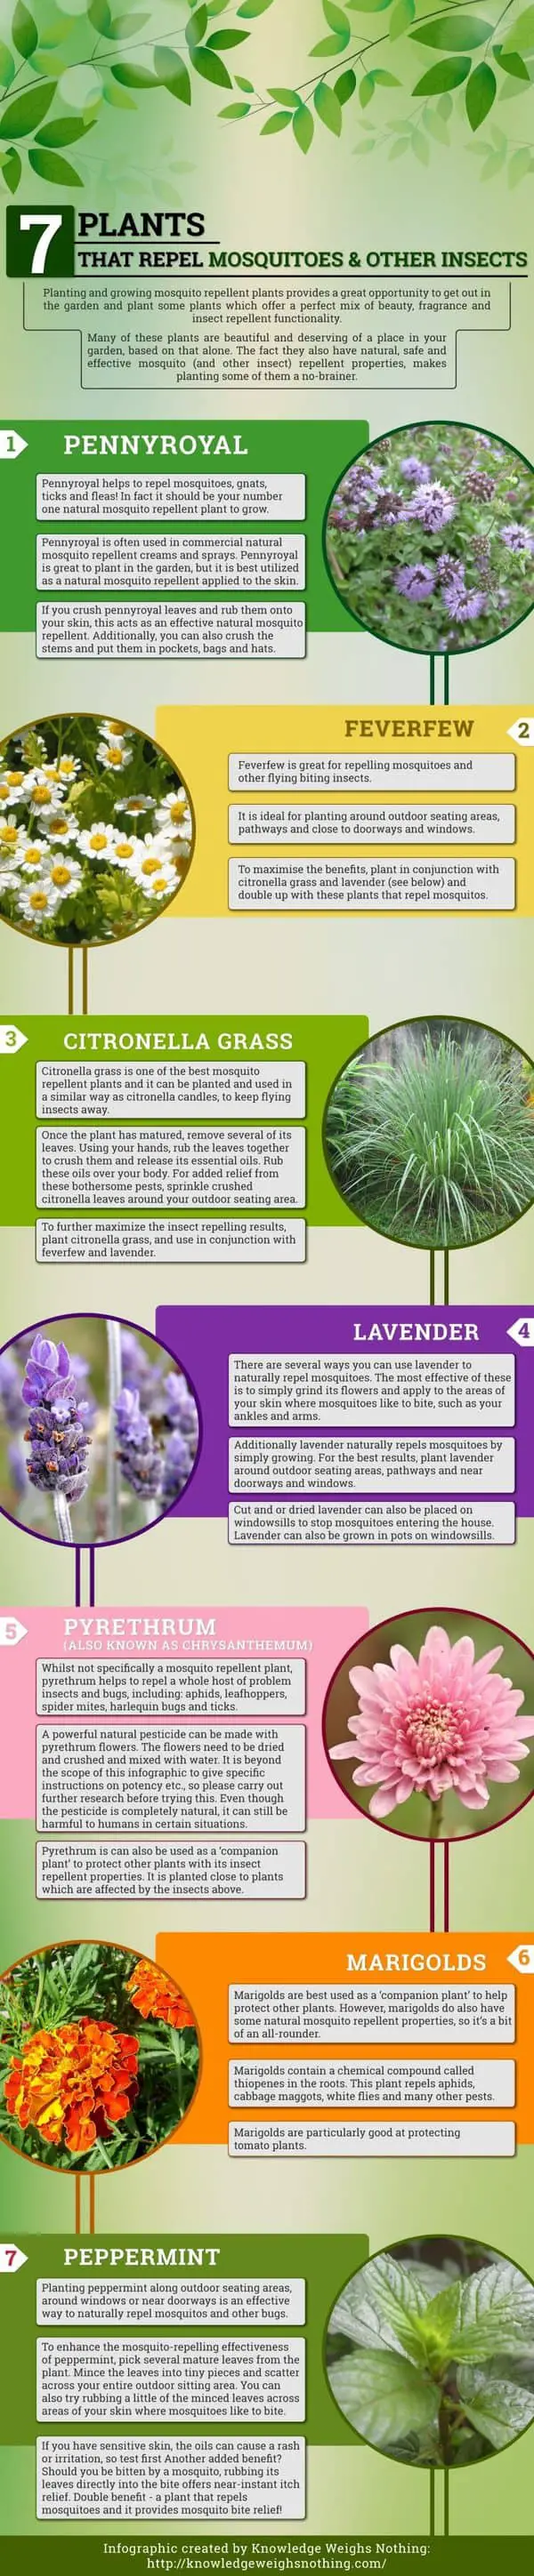 Plants That Repel Mosquitoes Infographic